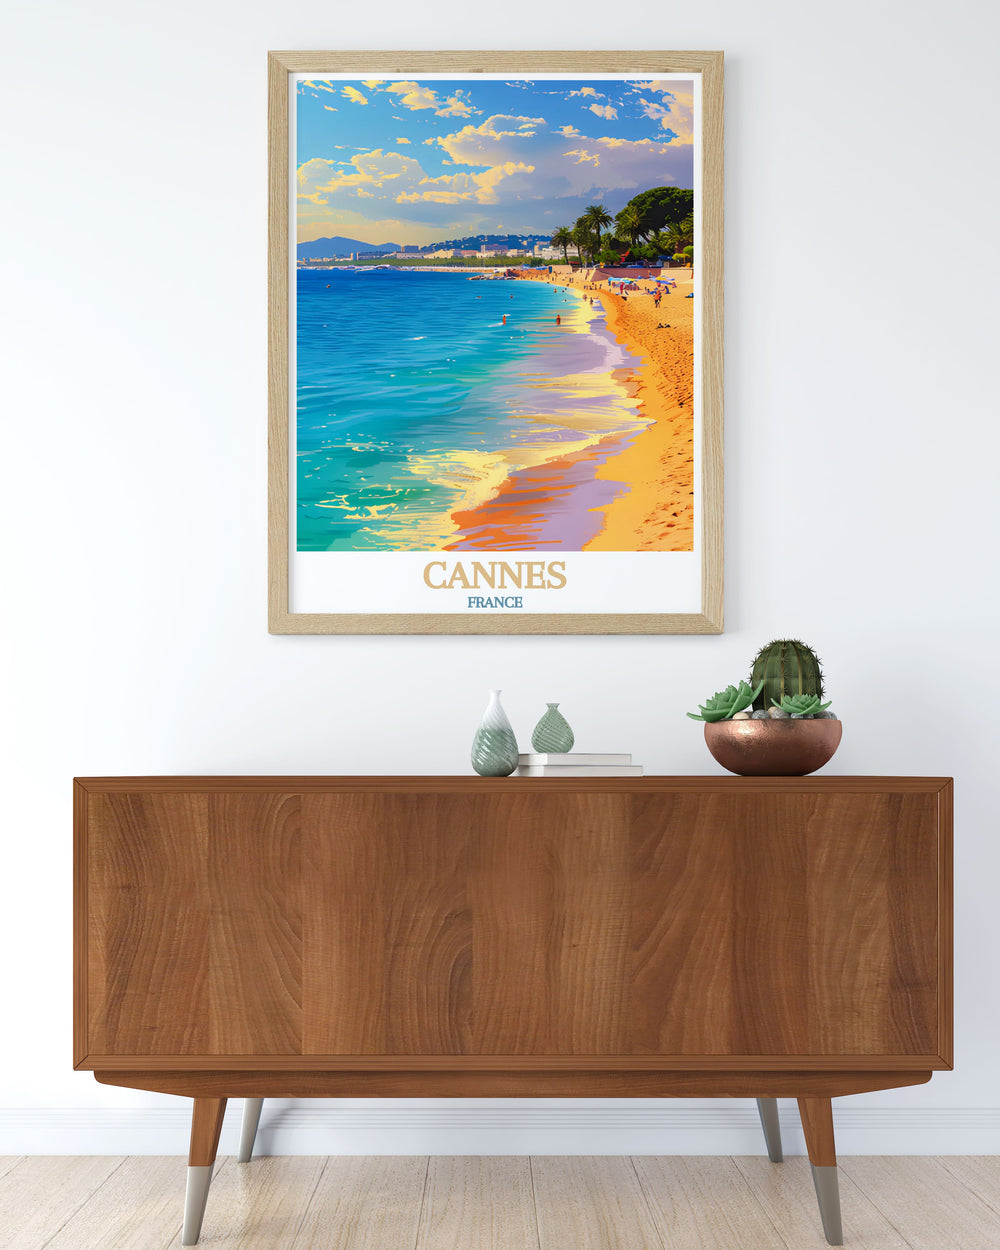 Elegant Plage de la Croisette artwork featuring the picturesque beauty of Cannes this France art print brings the charm and sophistication of French culture into your home a stunning piece of France travel art for your collection ideal for enhancing any interior space